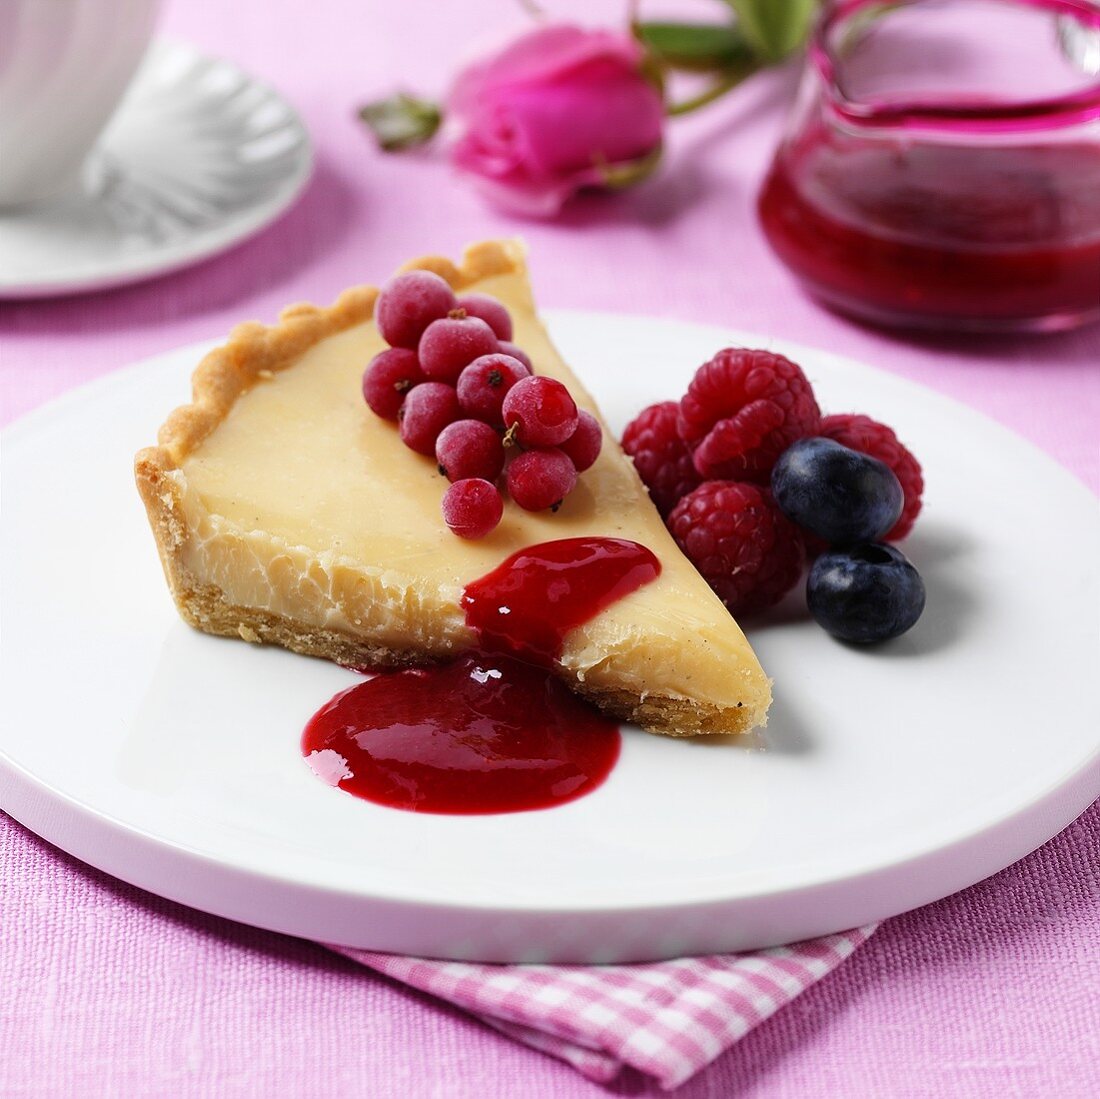 White chocolate tart with berries and fruit sauce